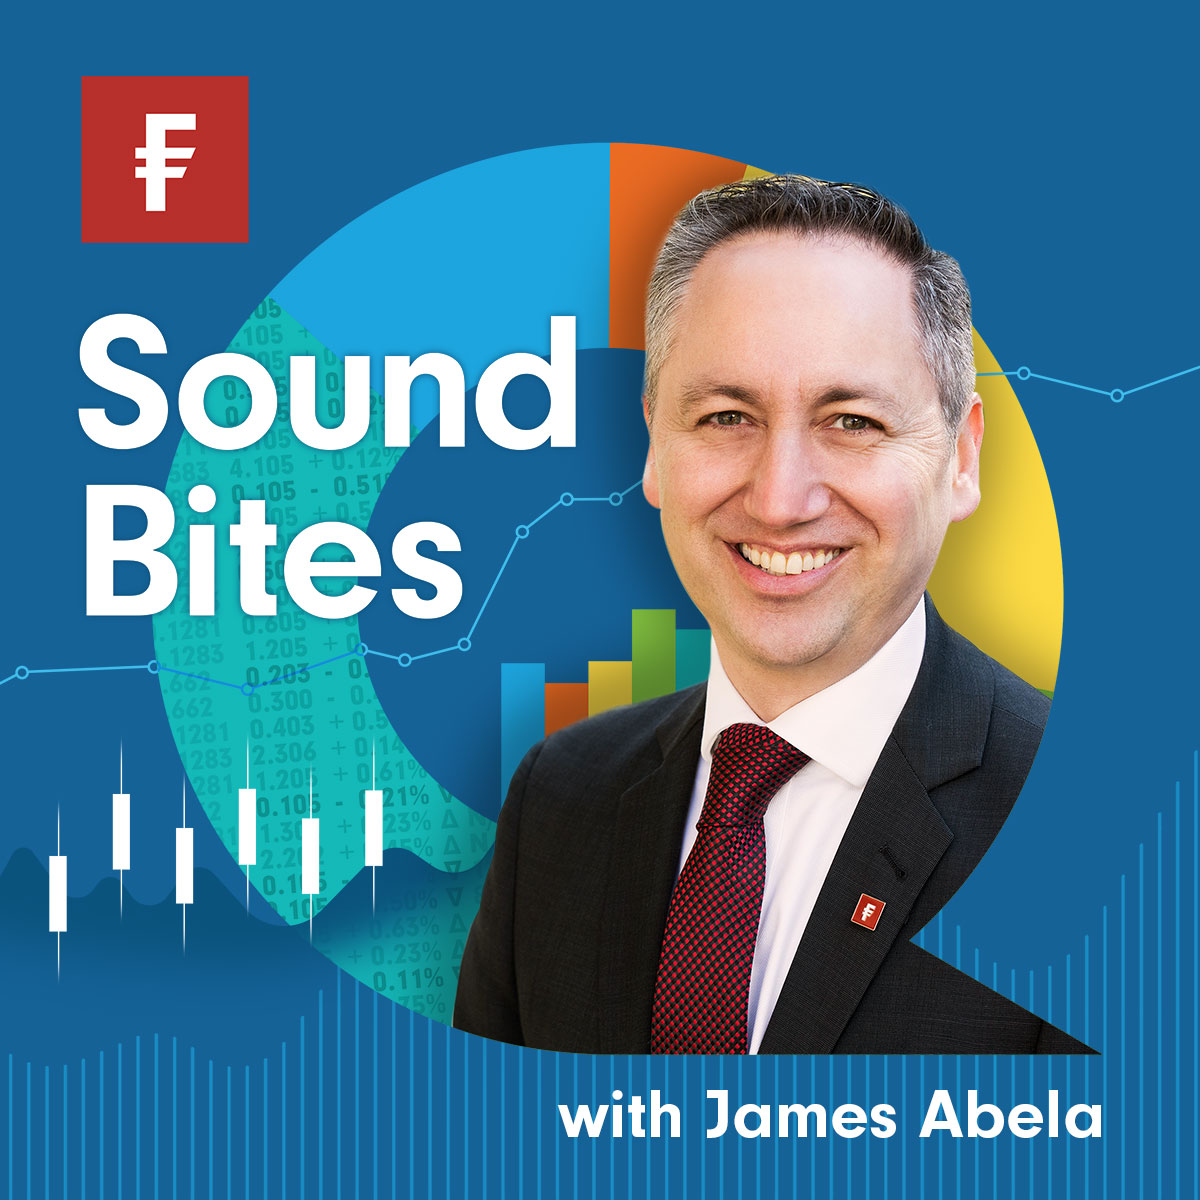 James Abela | Small and mid-caps: What are the signals telling us?